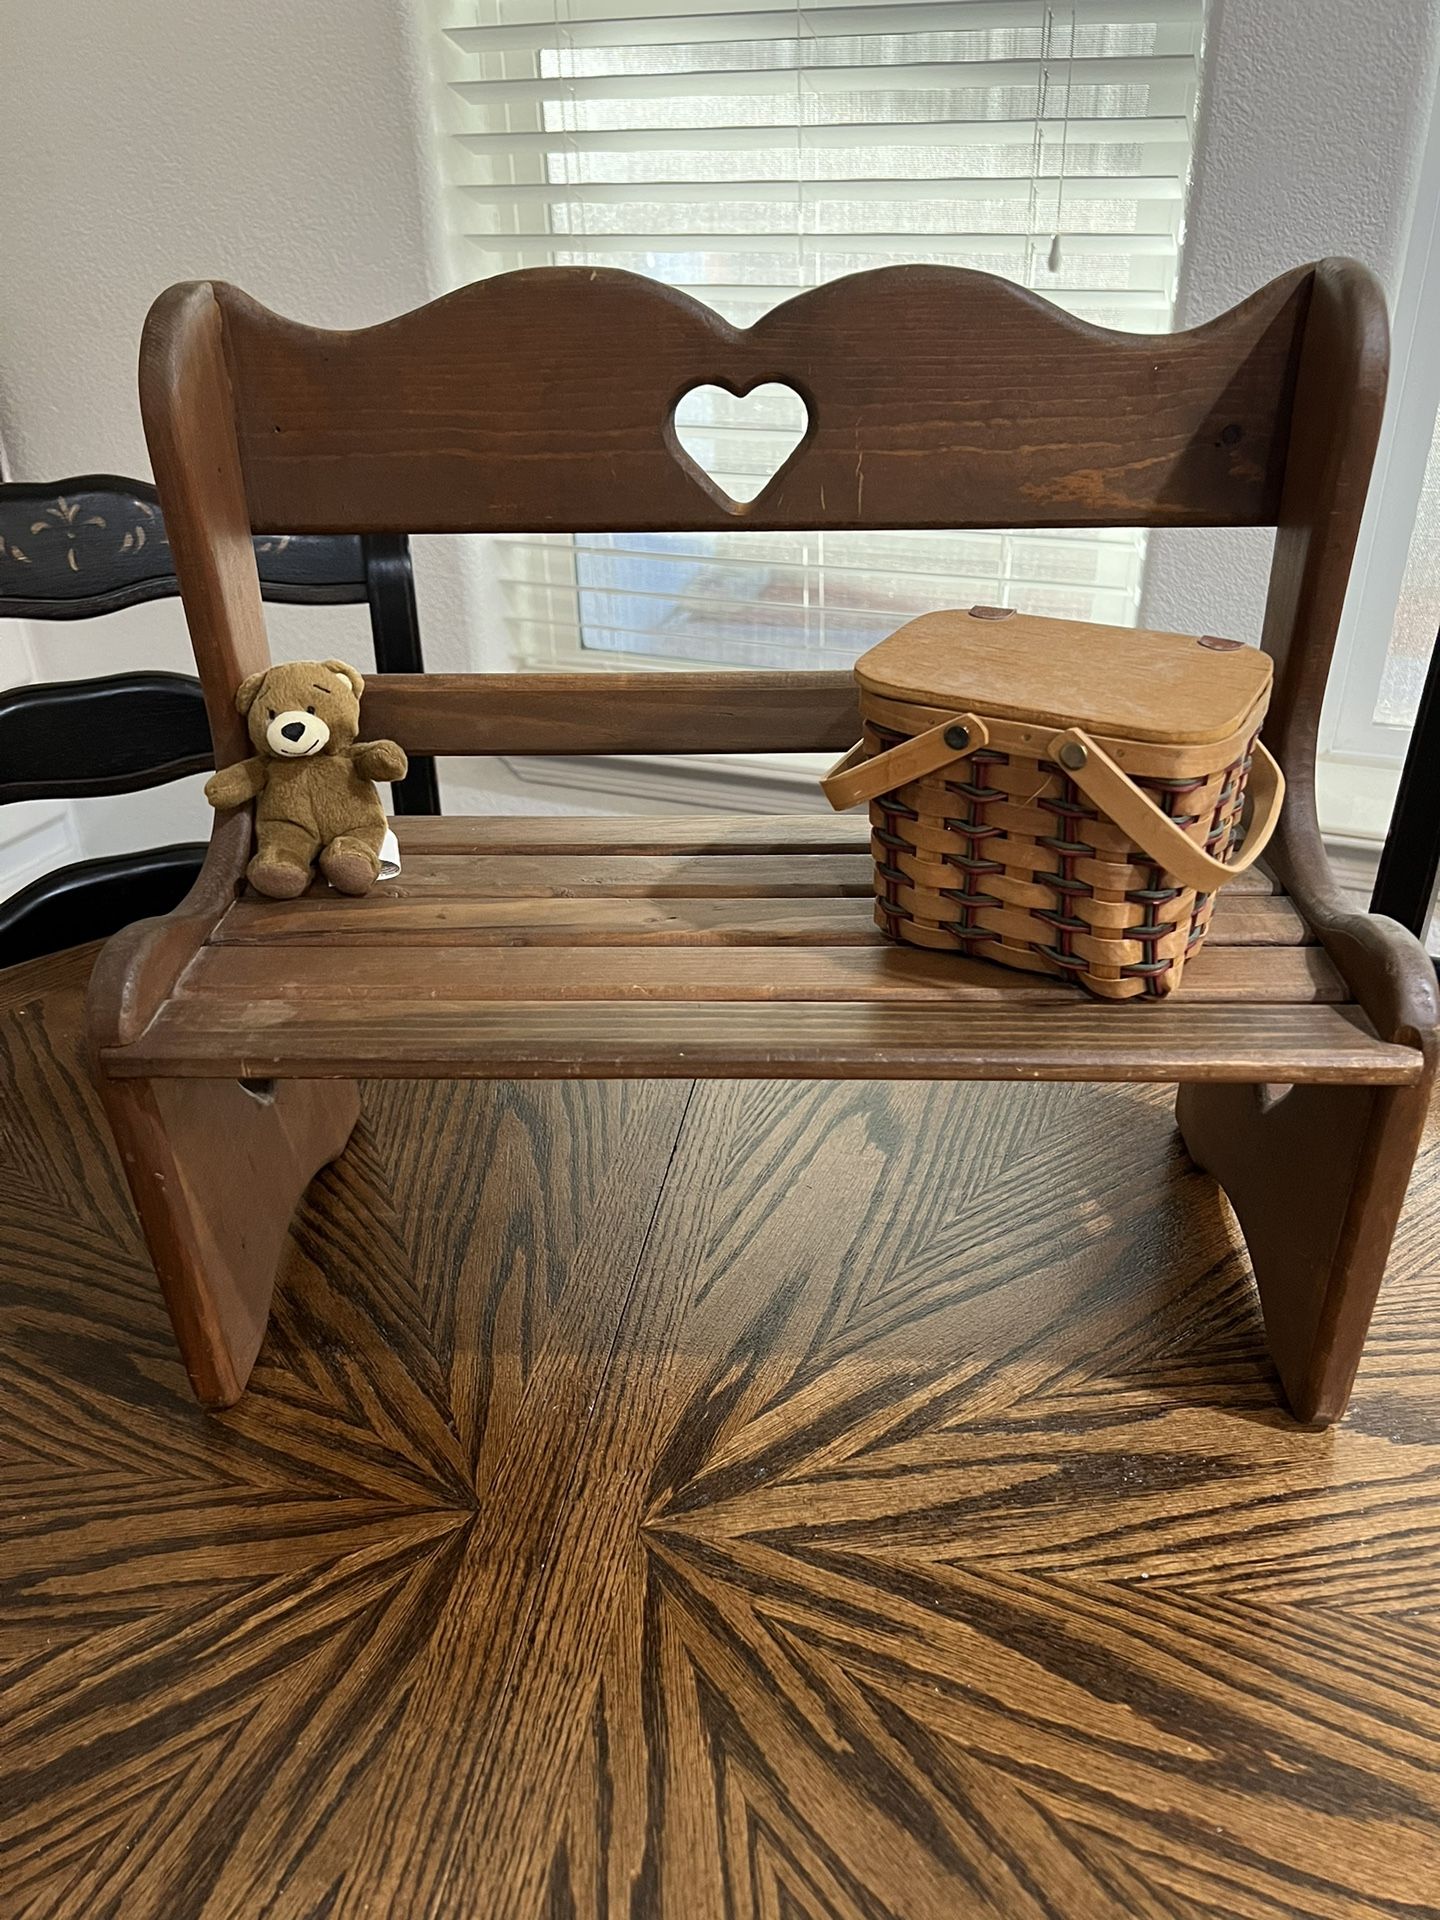 Antique Doll Bench $15.00